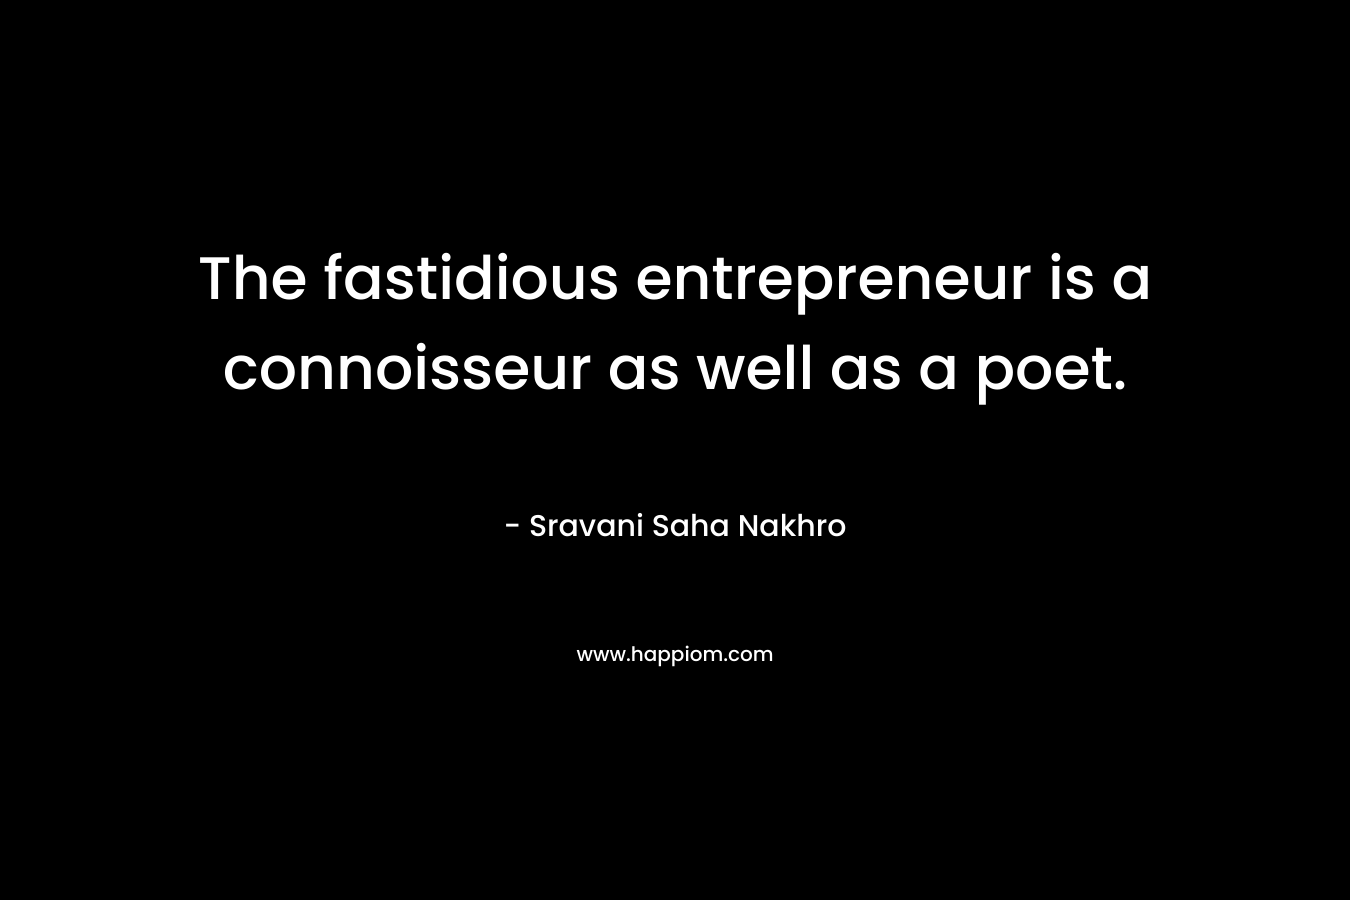 The fastidious entrepreneur is a connoisseur as well as a poet.